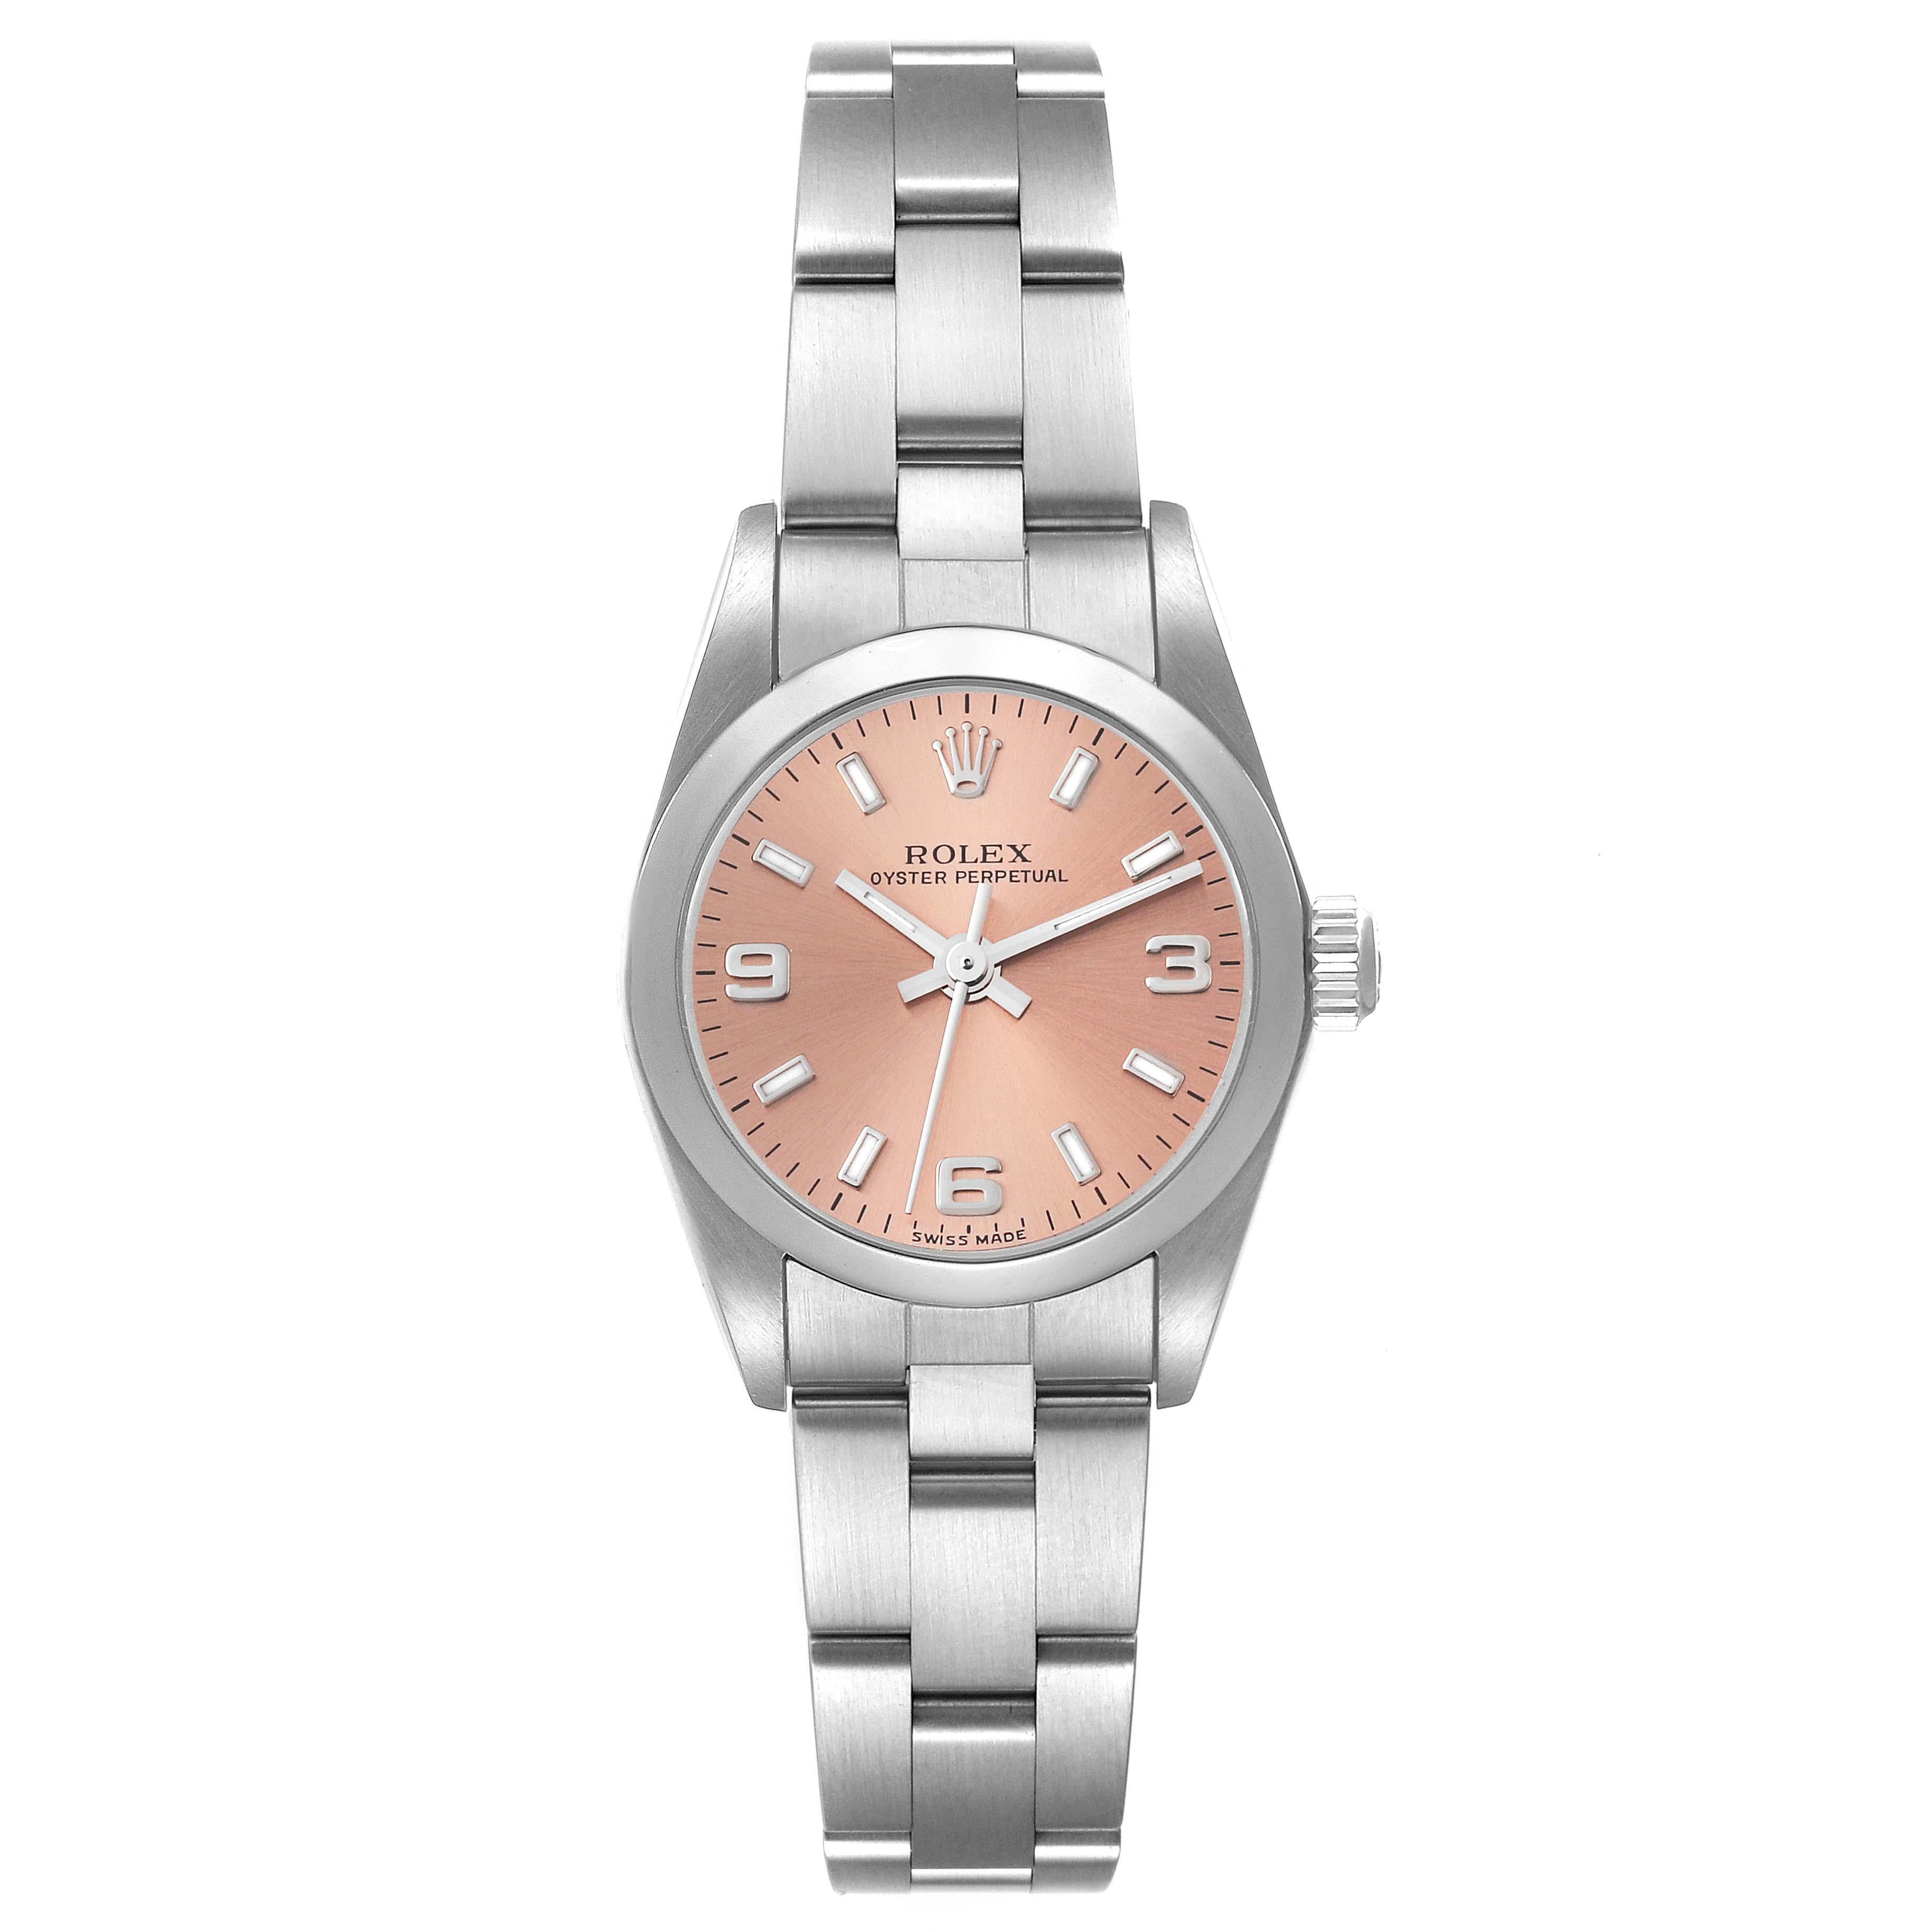 Rolex Oyster Perpetual Salmon Dial Steel Ladies Watch 76080. Officially certified chronometer automatic self-winding movement. Stainless steel oyster case 24.0 mm in diameter. Rolex logo on the crown. Stainless steel smooth bezel. Scratch resistant